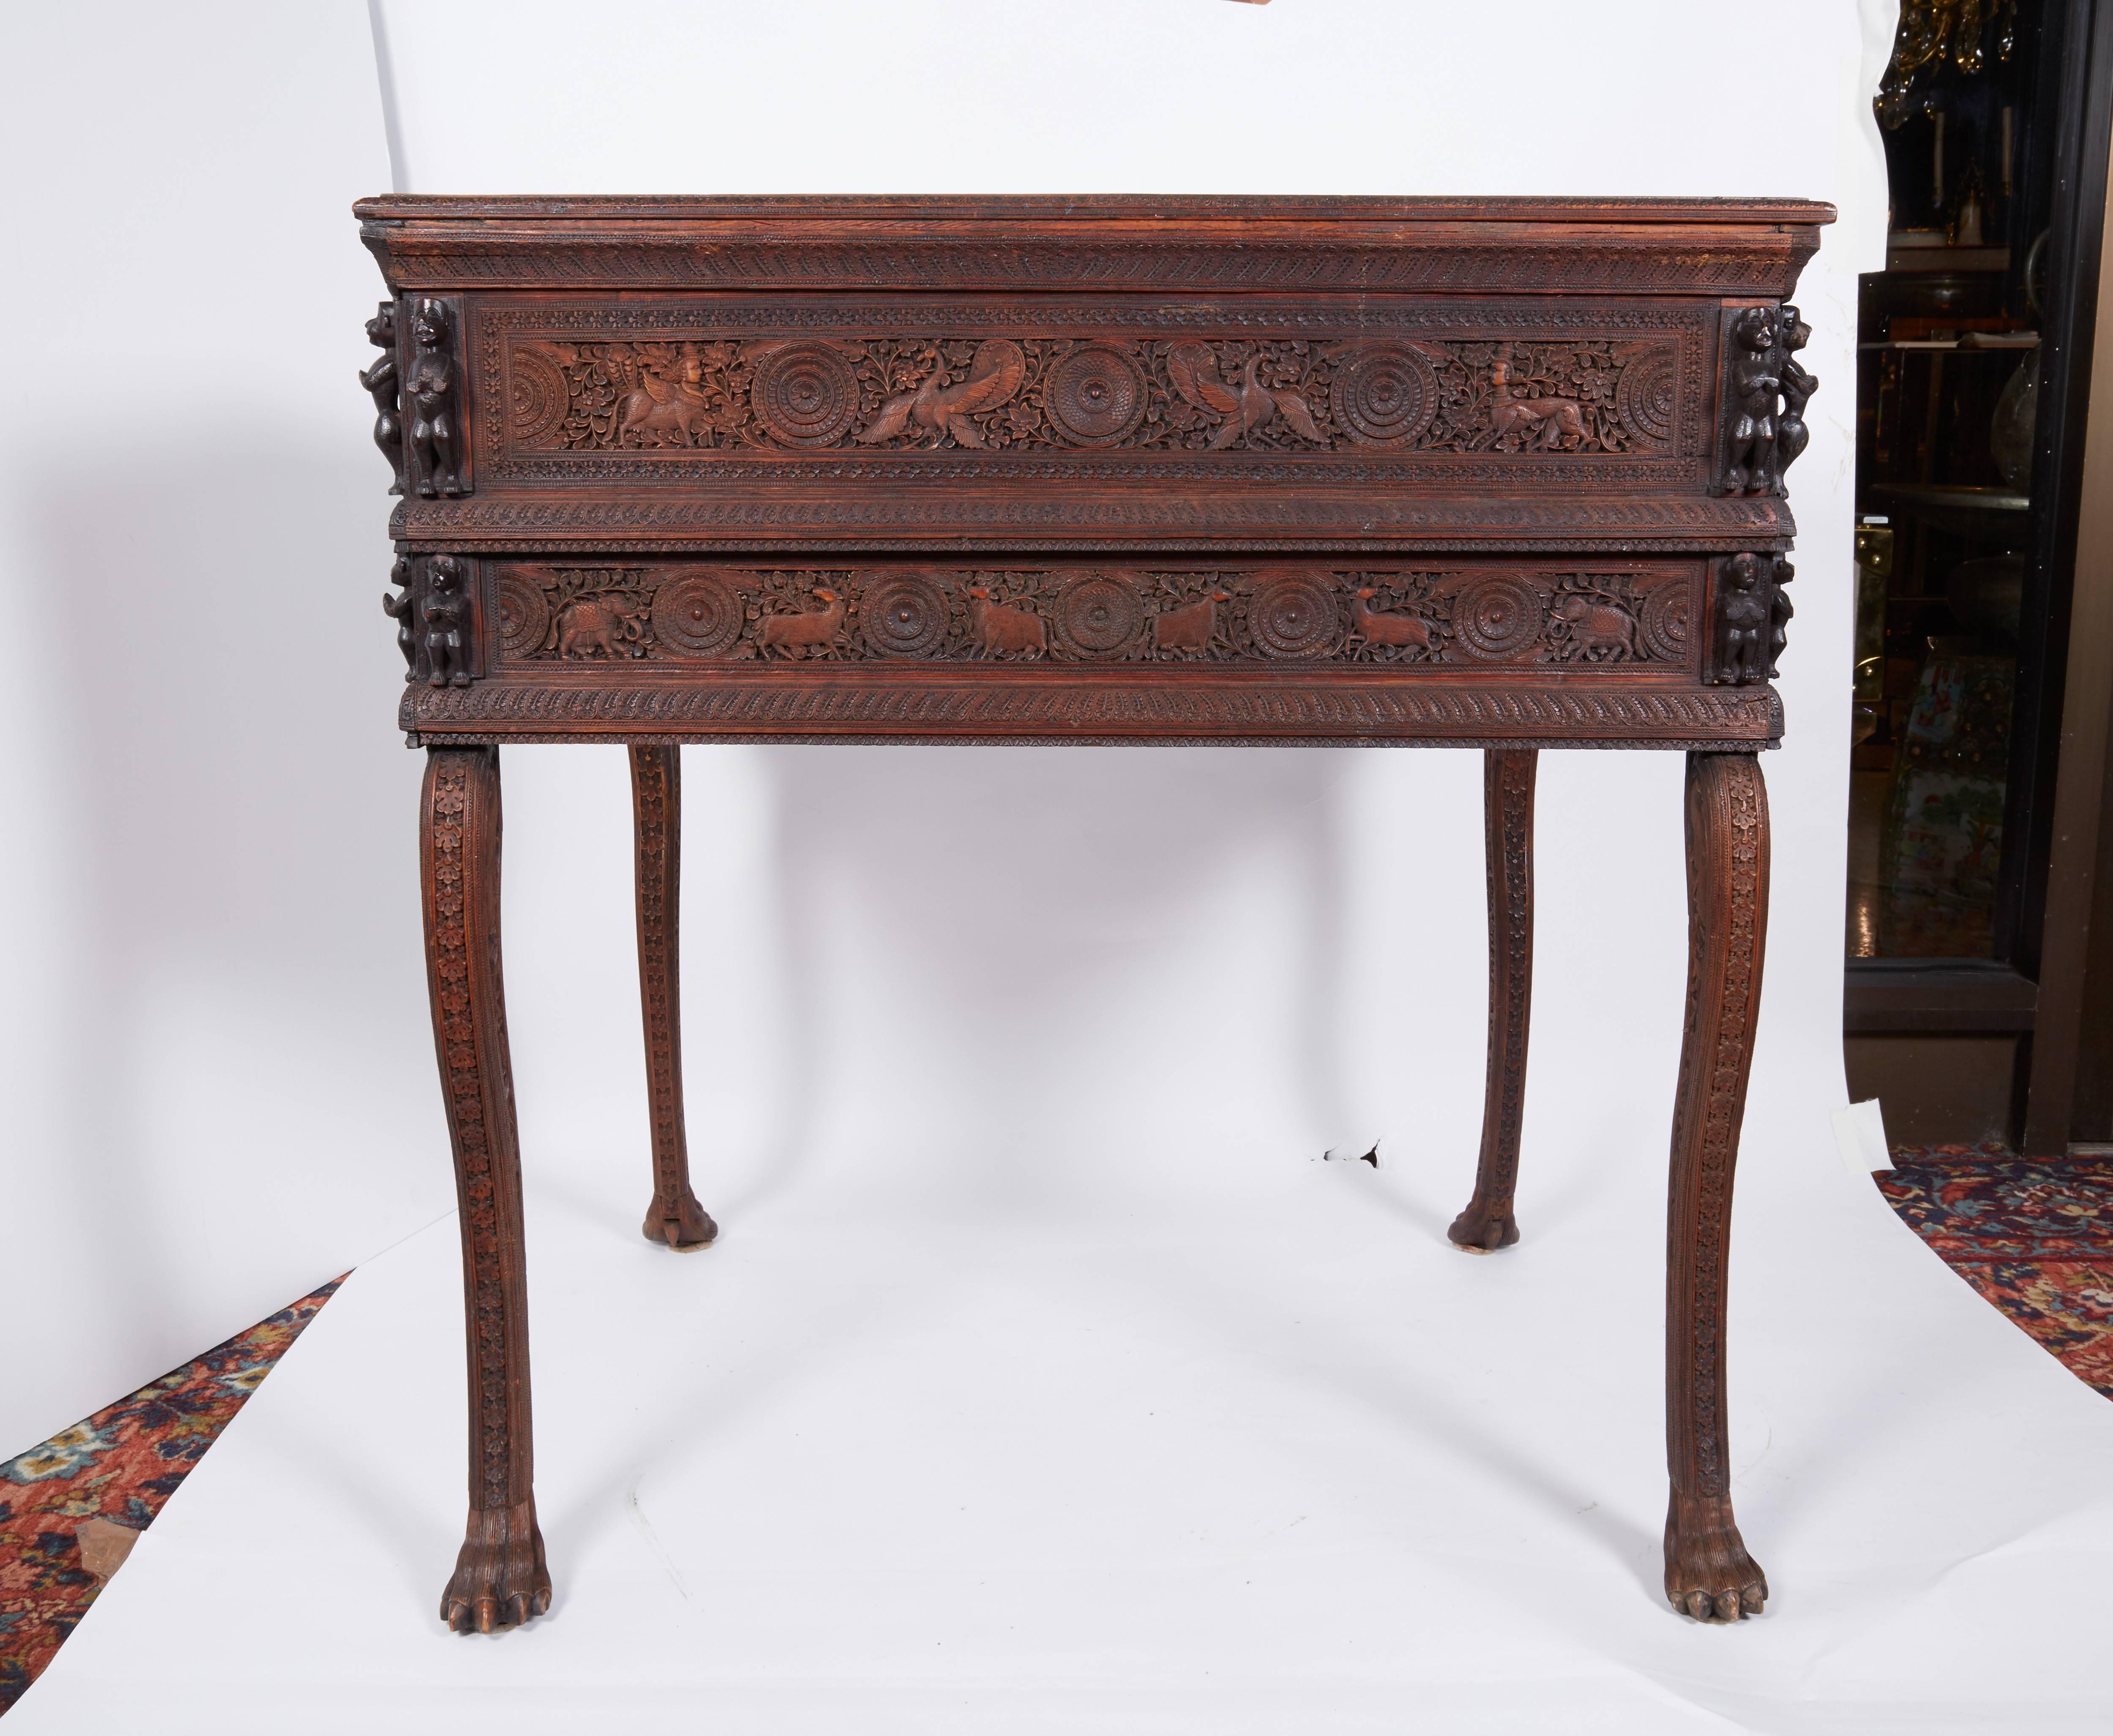 Exquisite Anglo-Indian Sandalwood Carved Writing Desk Mysore, South India 1